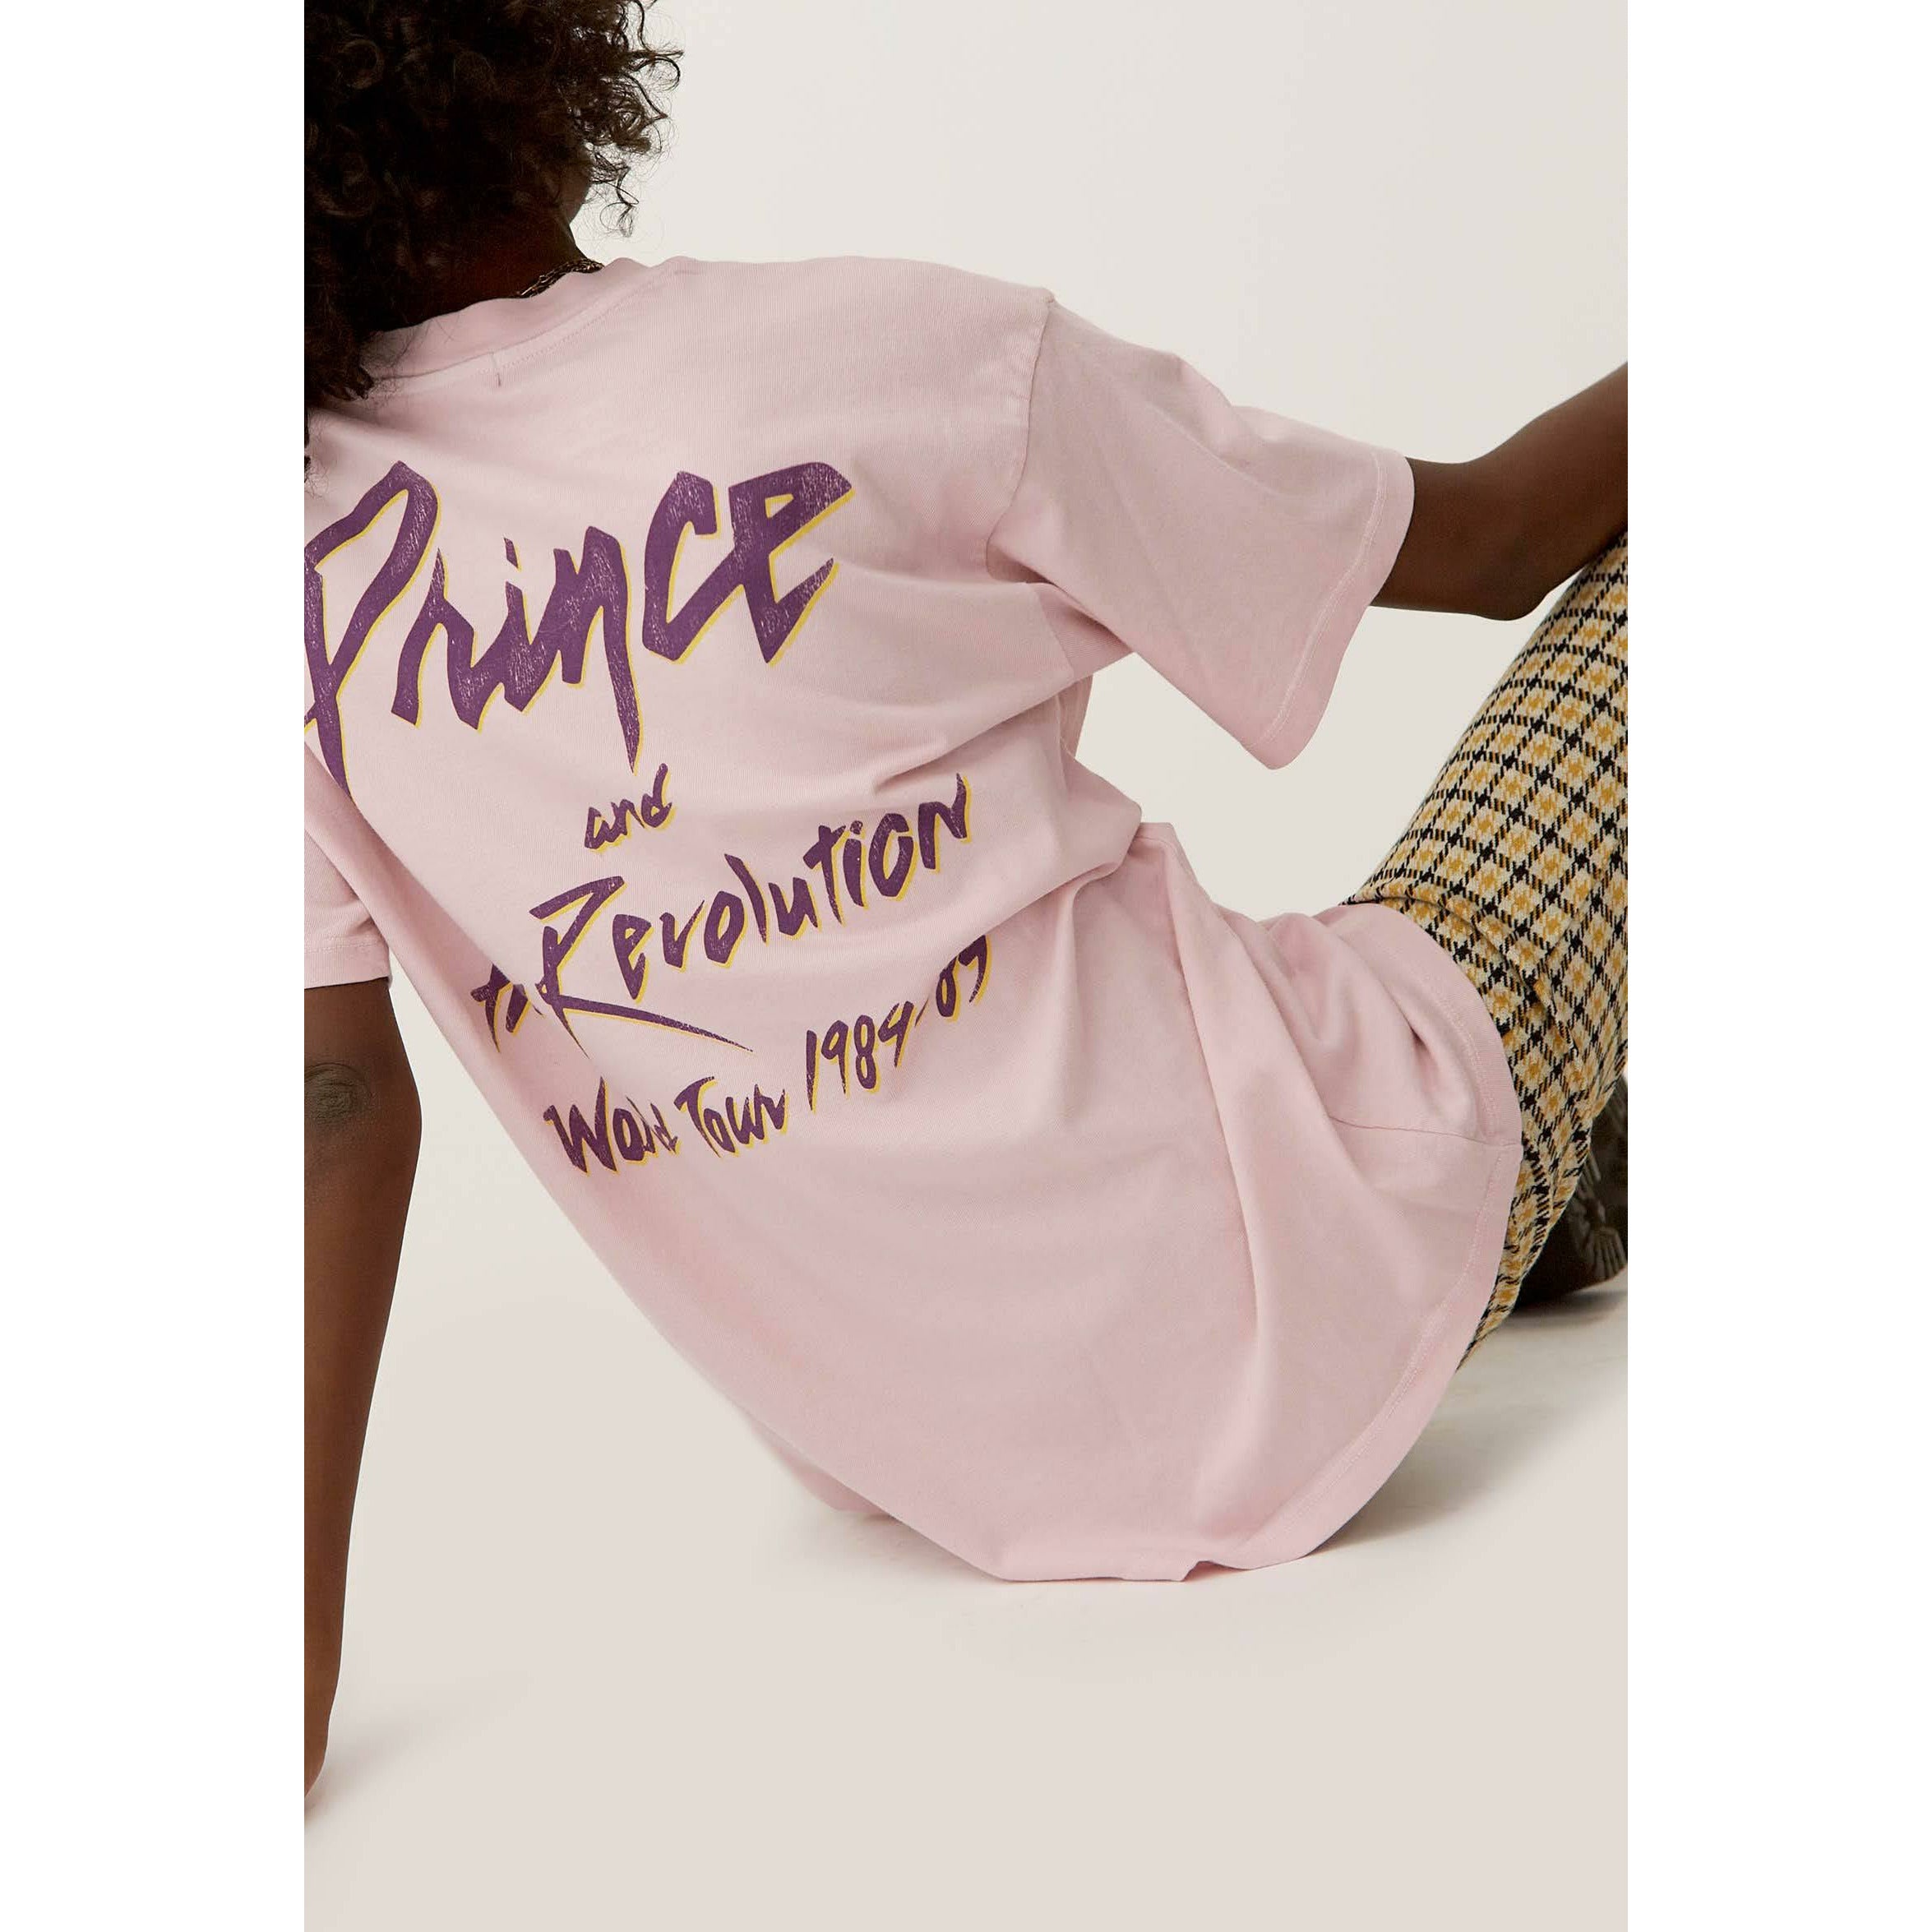 Prince And The Revolution Weekend Tee